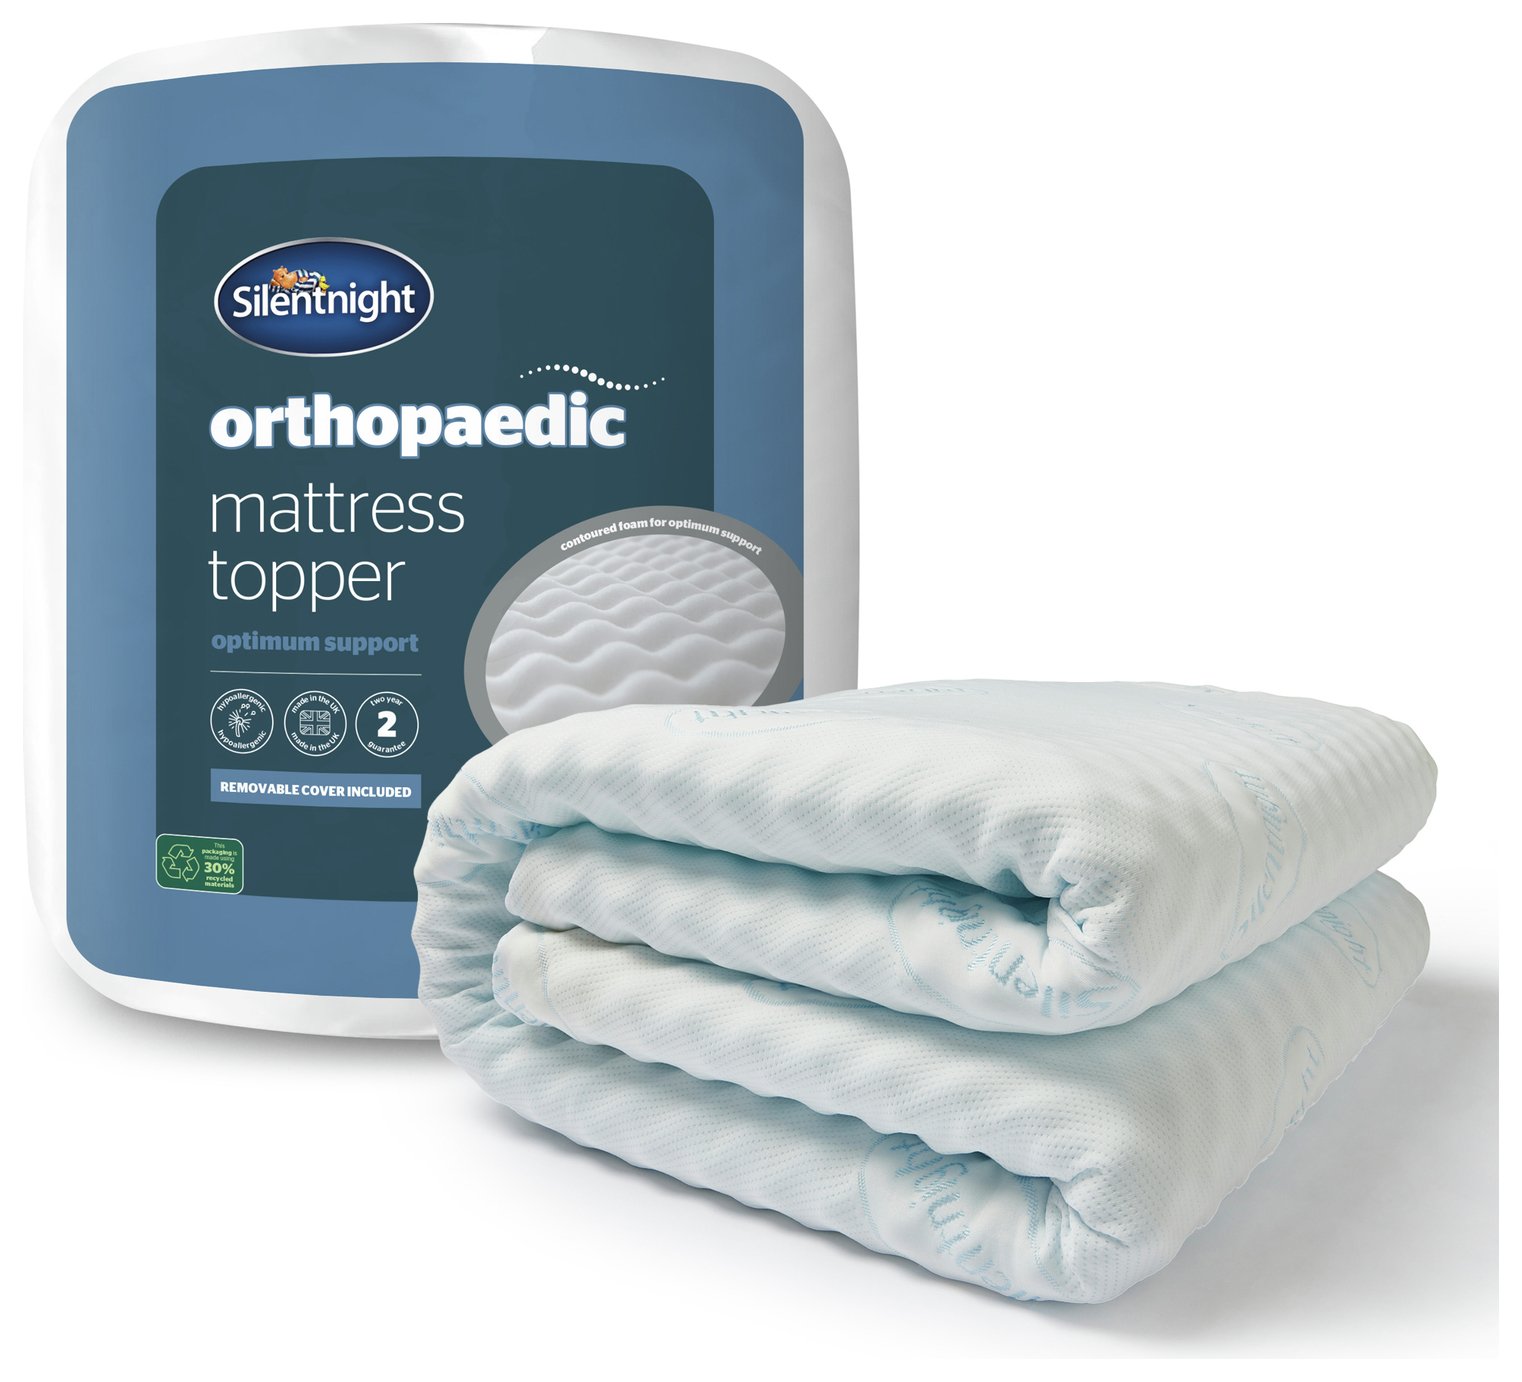 Silentnight Orthopaedic Mattress Topper with Cover - Double